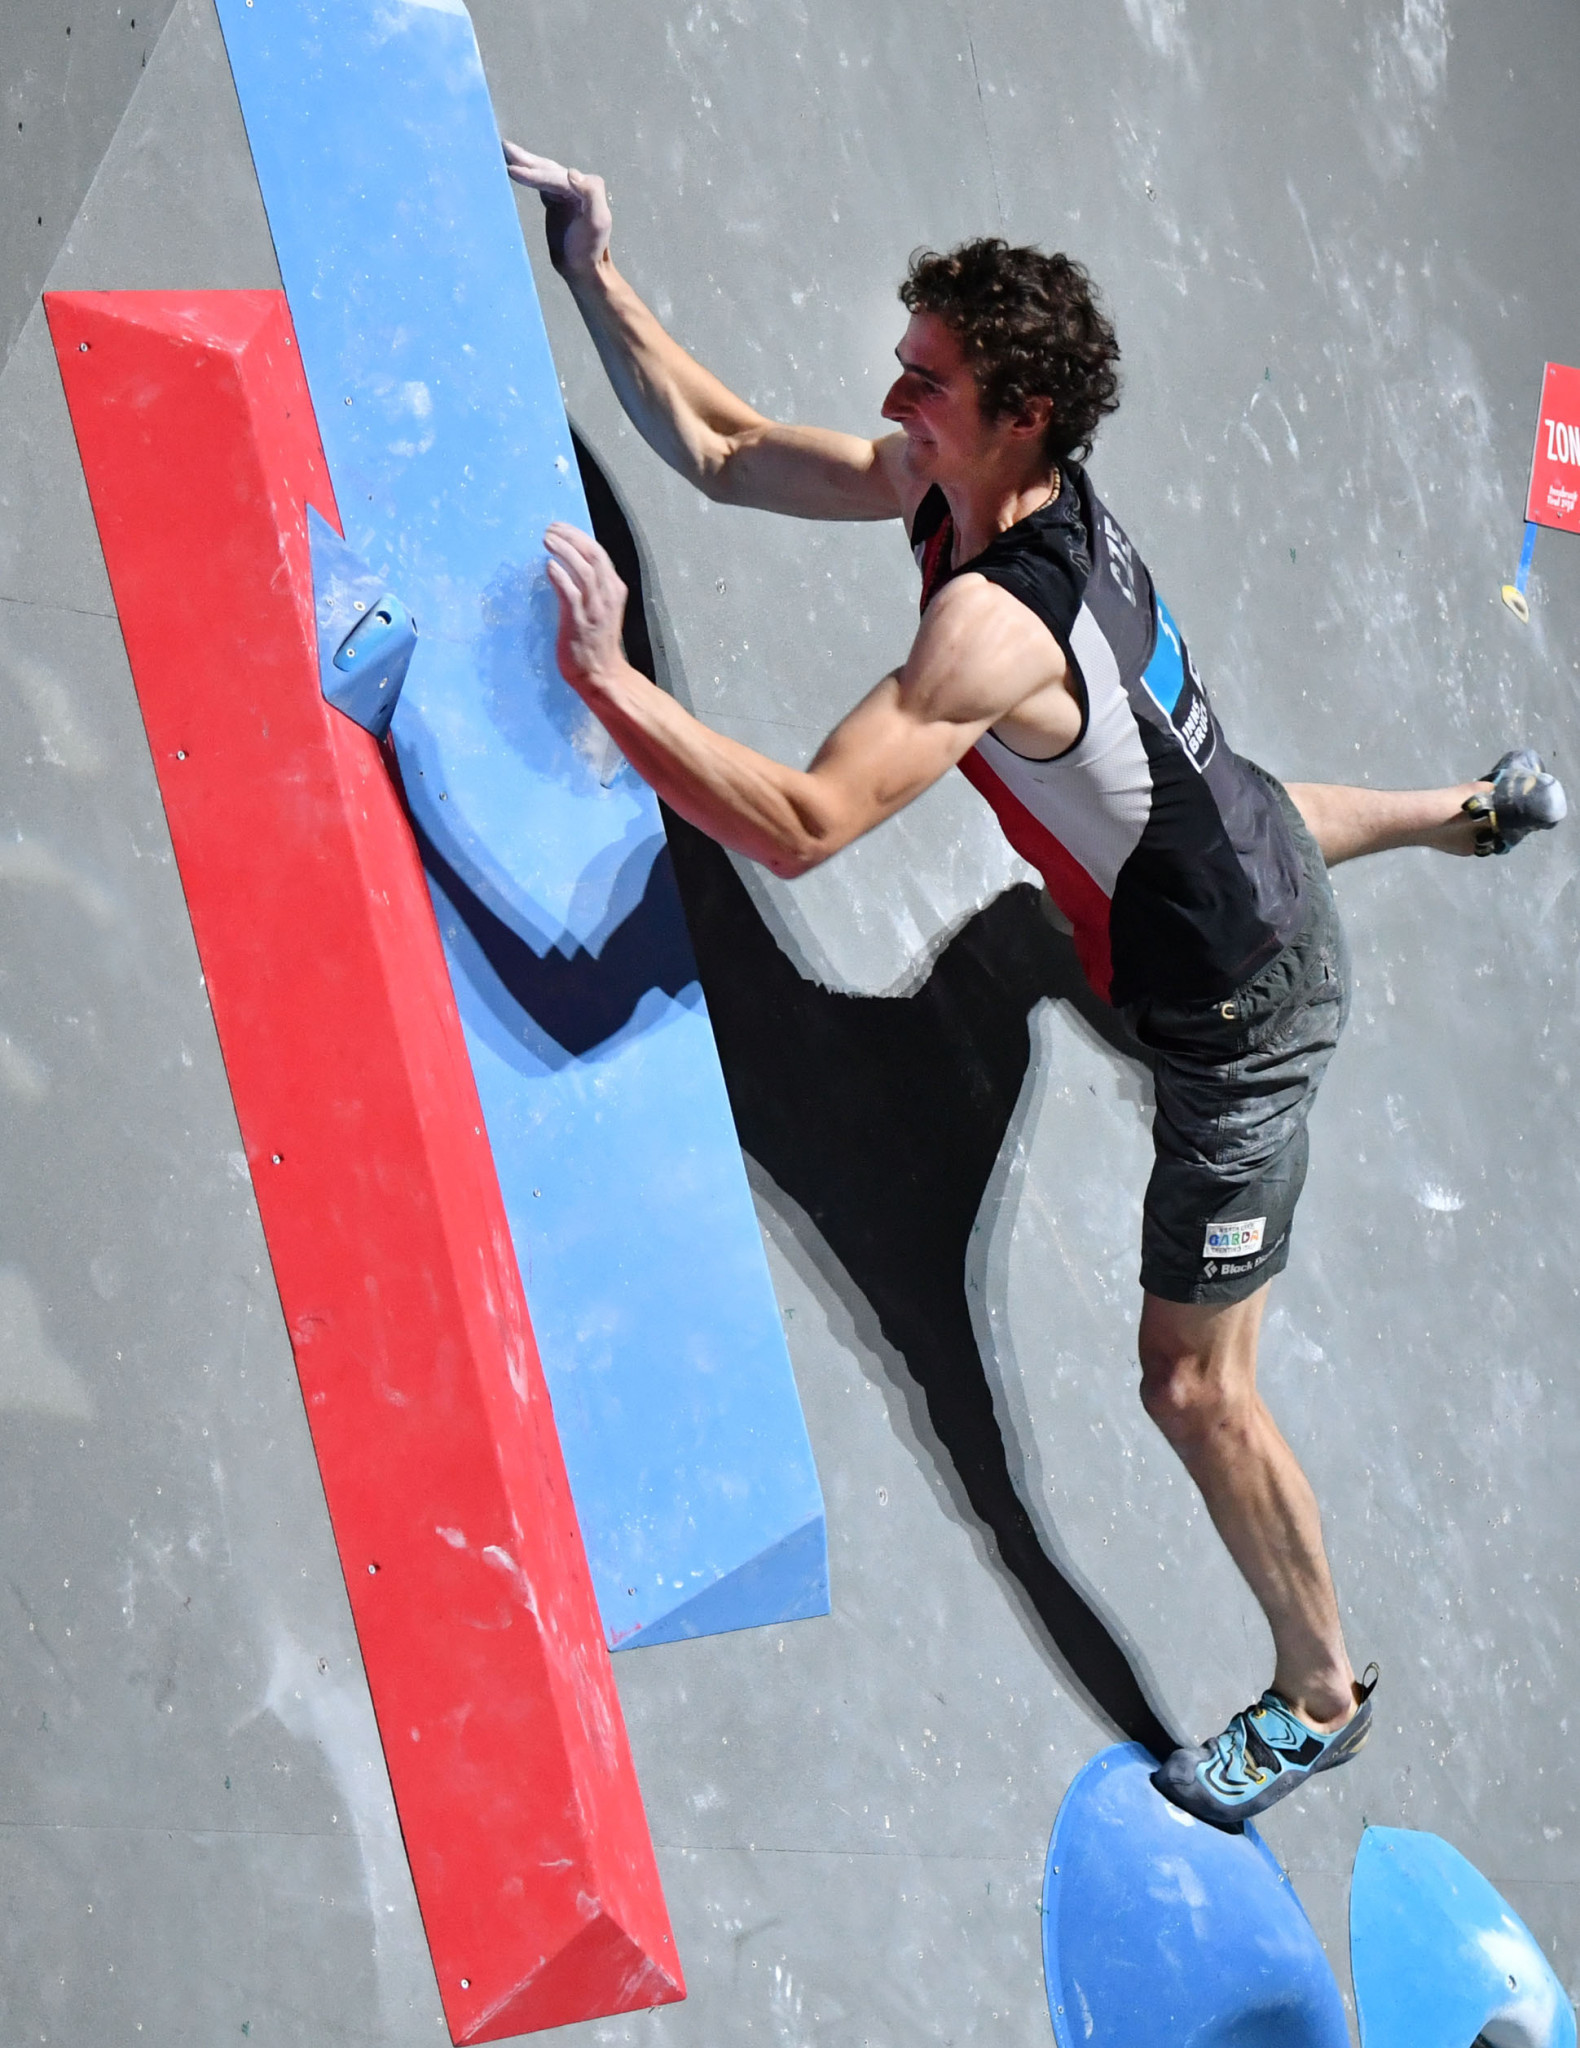 The Czech Republic's multiple world champion Adam Ondra topped men's qualifying ahead of tomorrow's IFSC Bouldering World Cup finals in Wujiang, China ©Getty Images